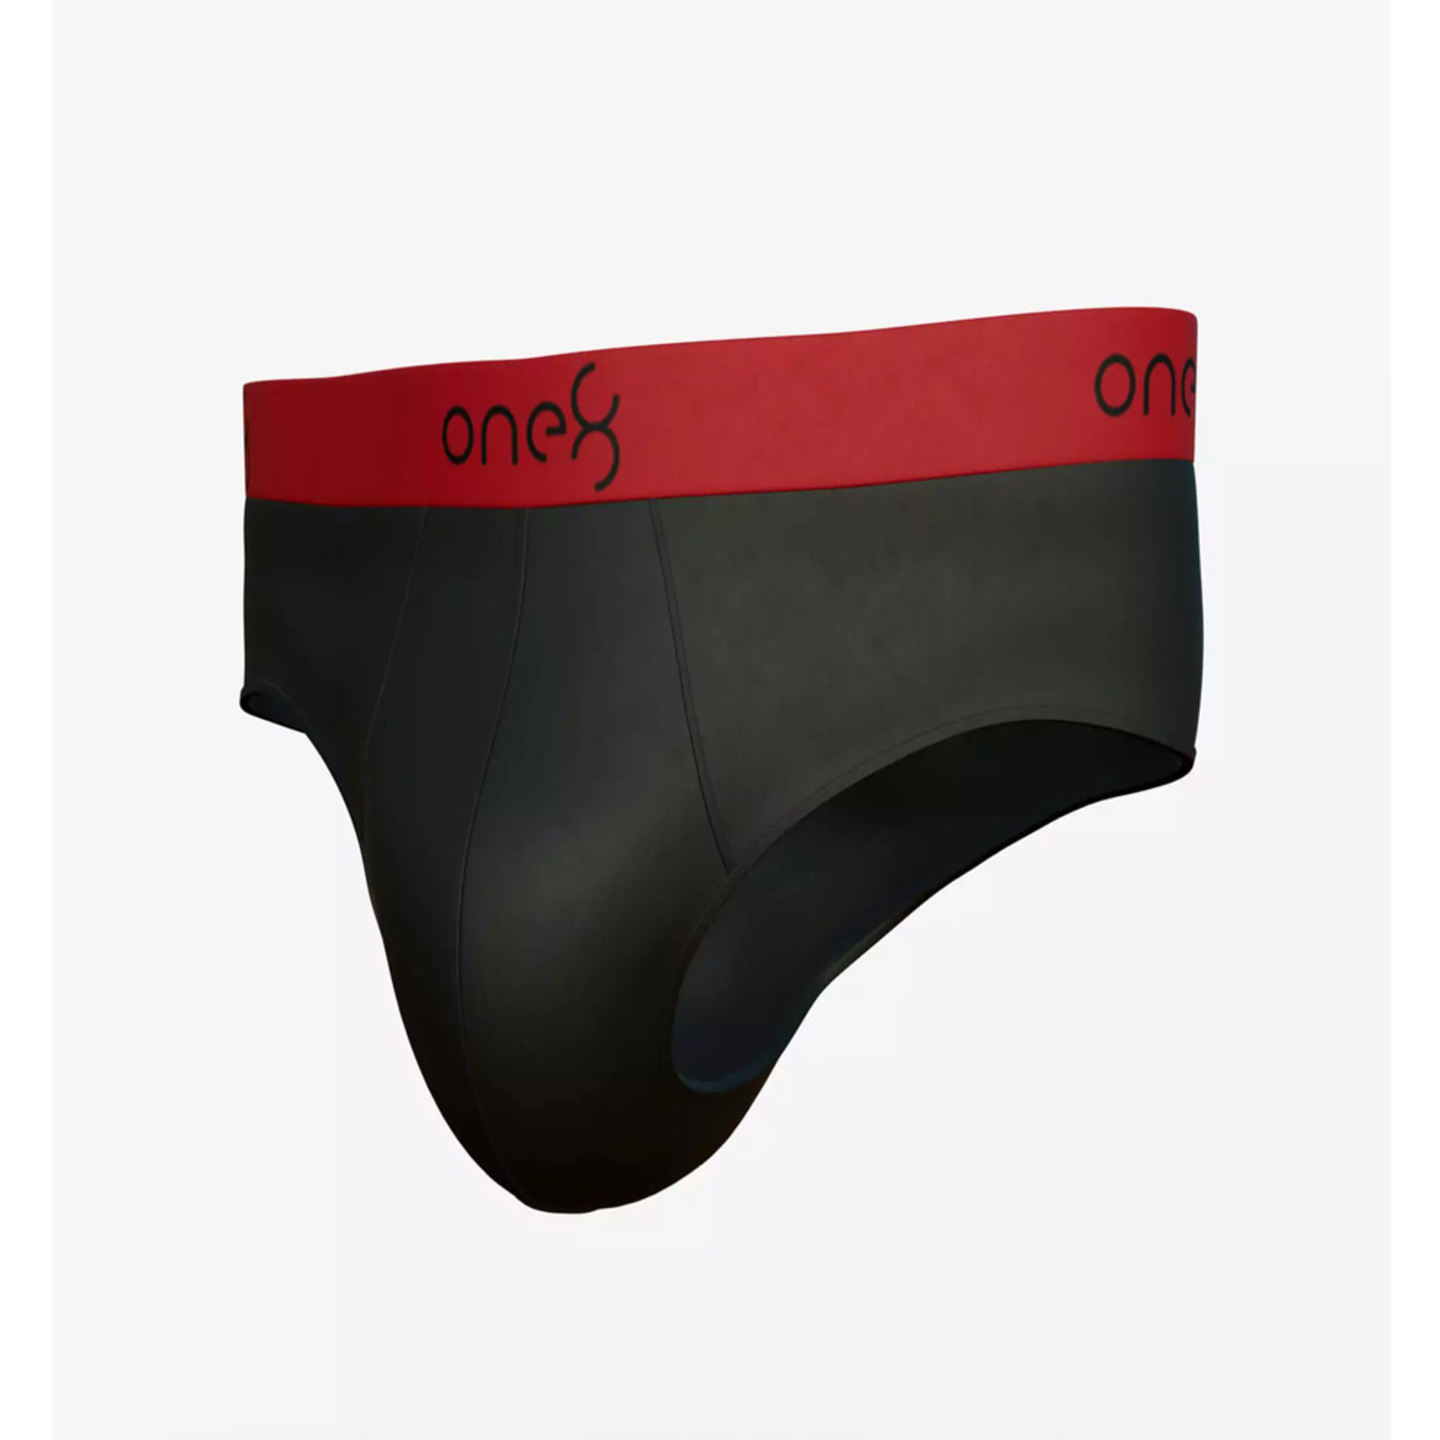 One8 Fashion Brief Style 104 for Men